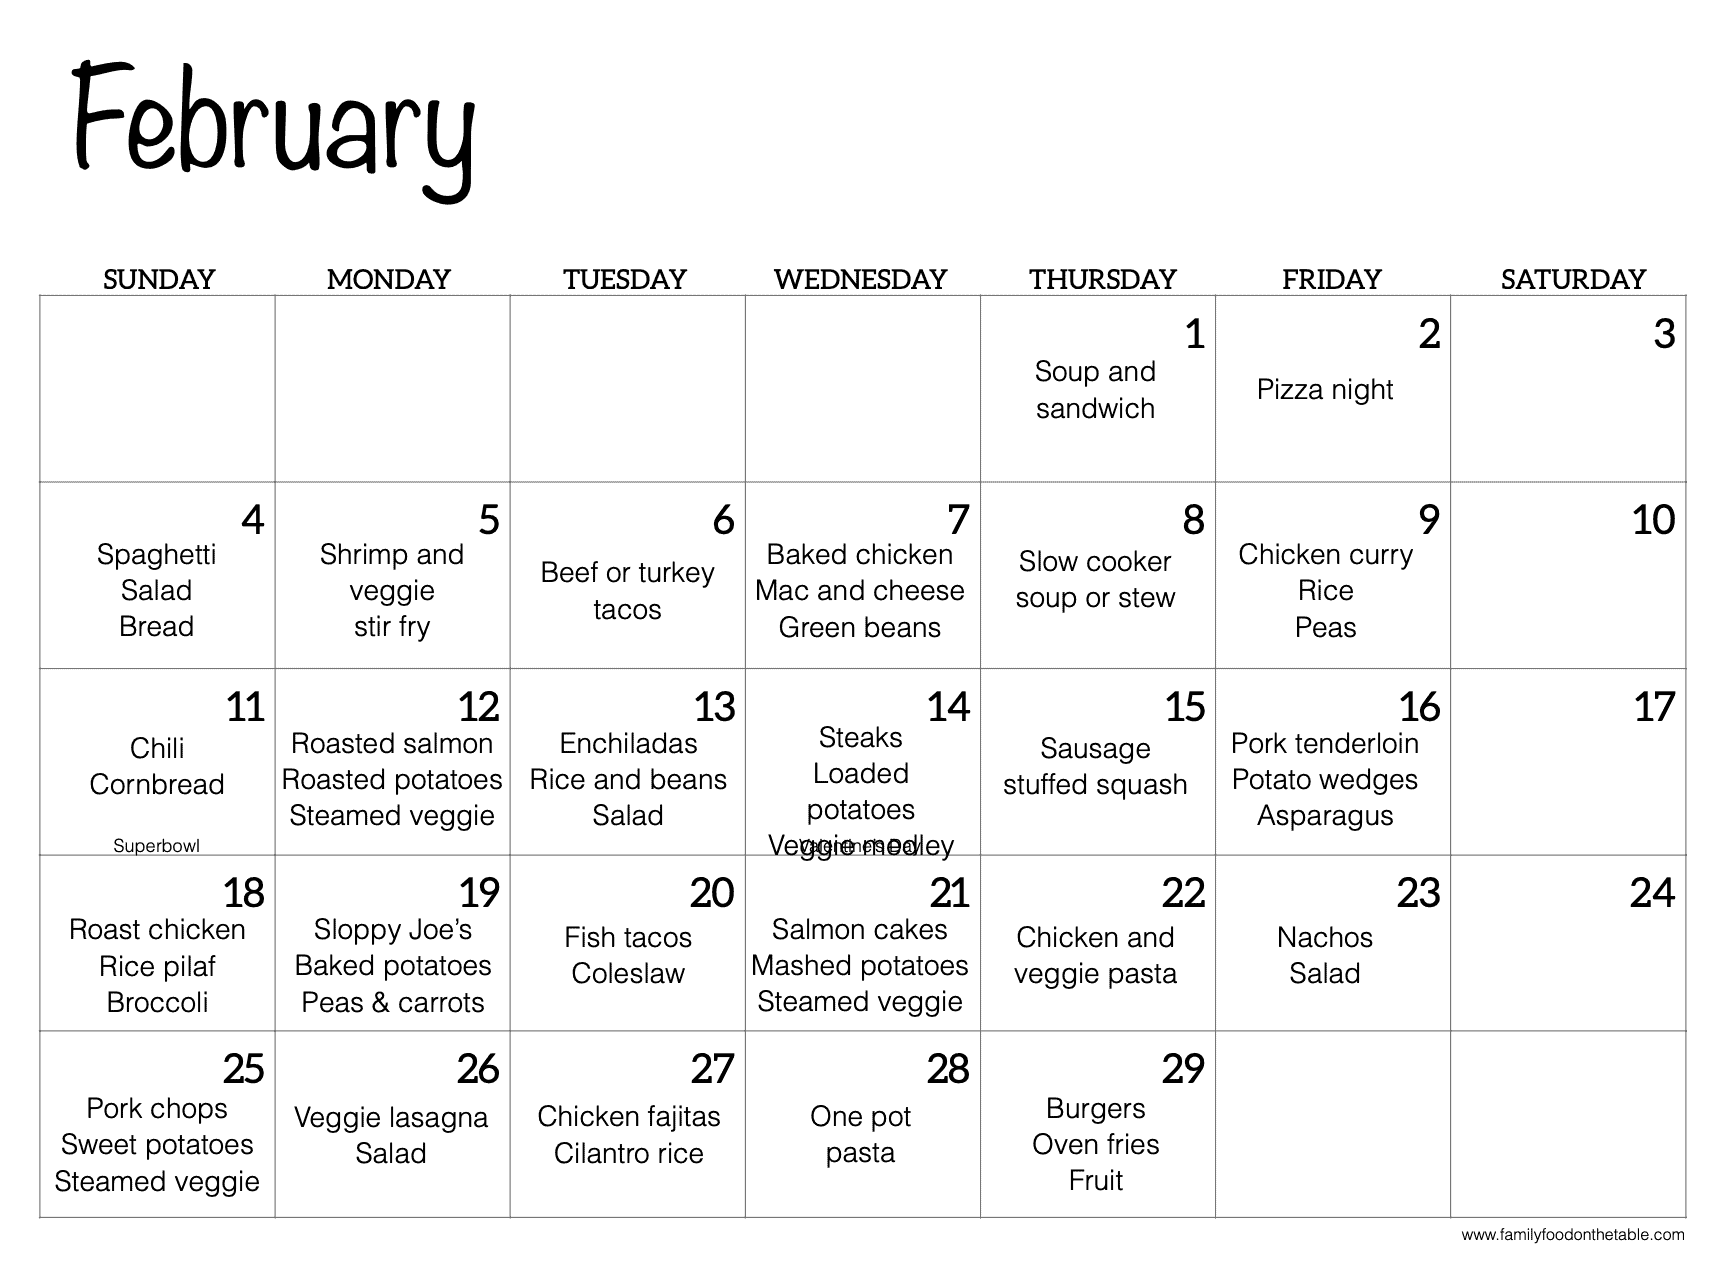 A February calendar with meal ideas for each night of the week typed in.